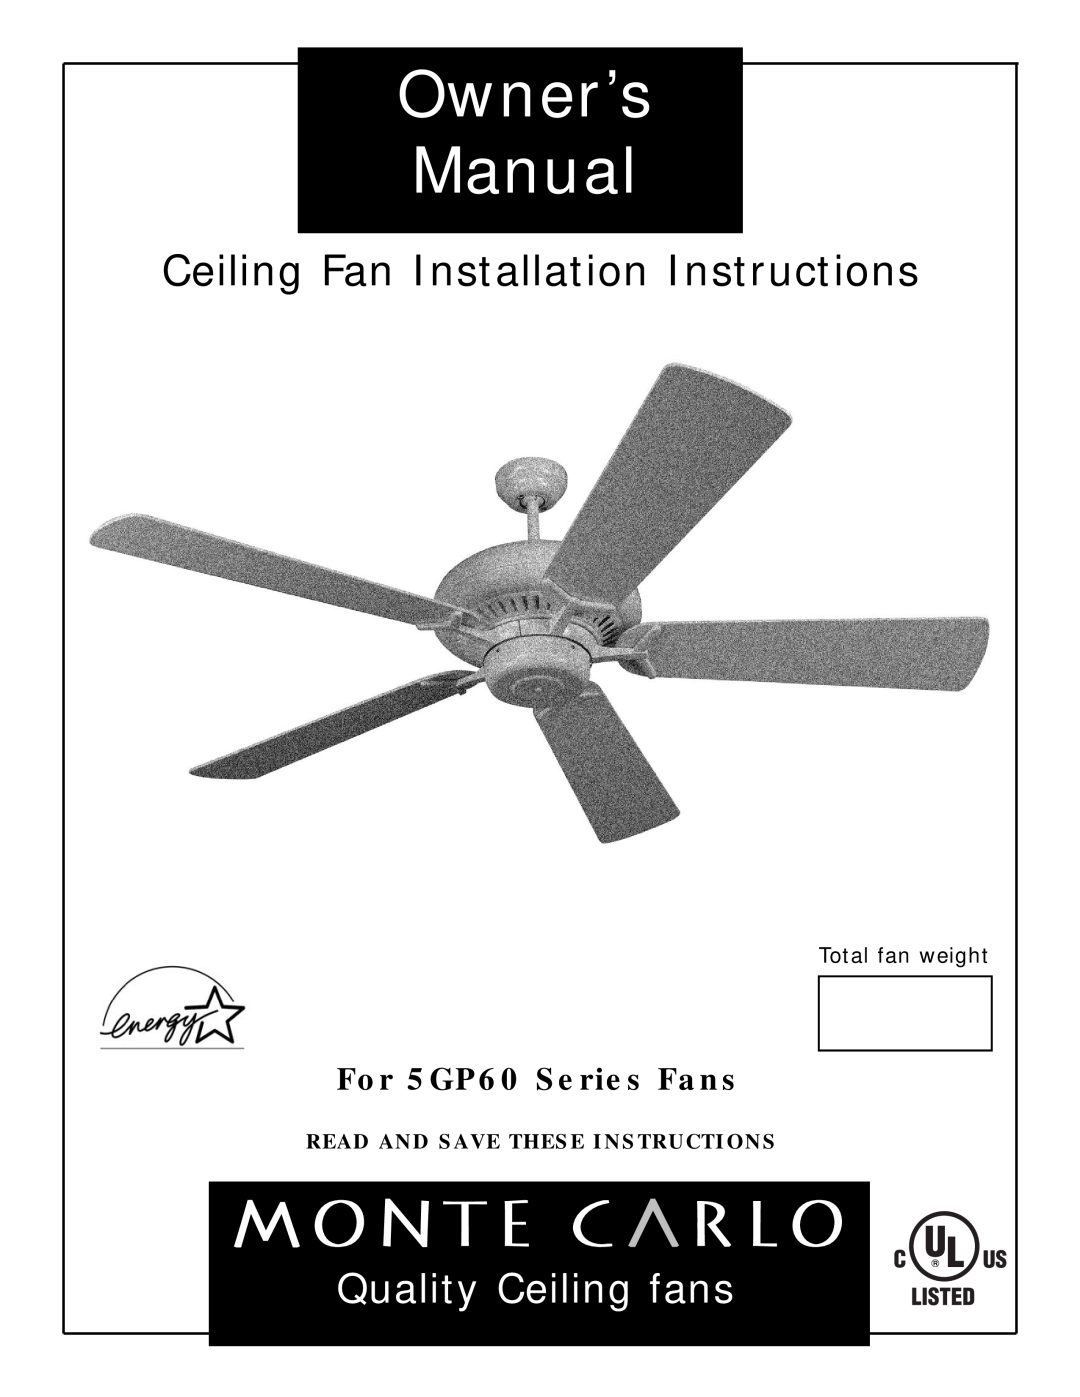 Monte Carlo Fan Company 5GP60 owner manual Read And Save These Instructions, Ceiling Fan Installation Instructions 